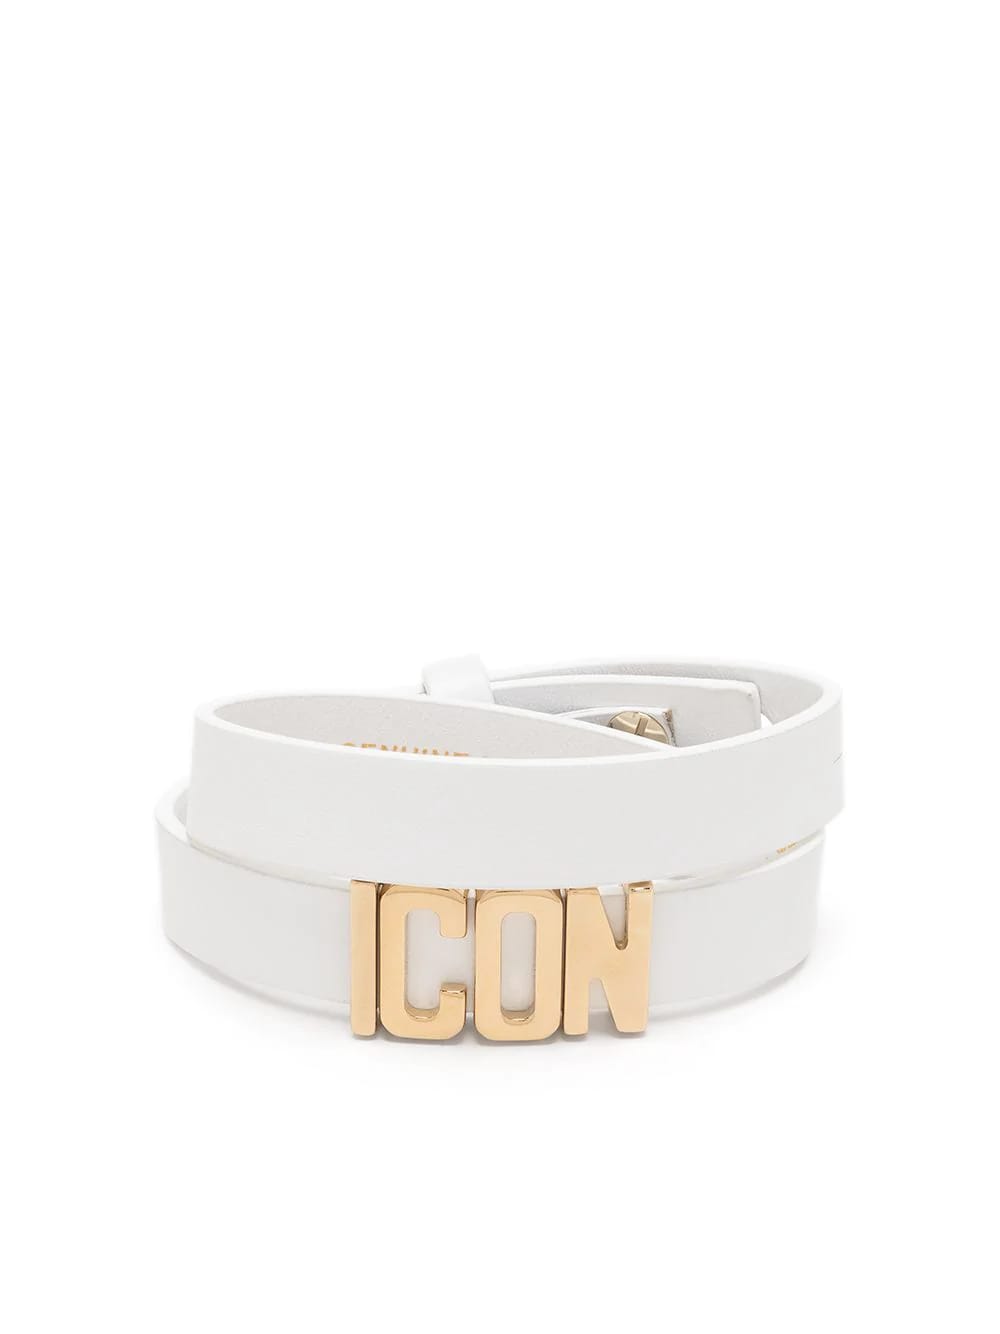 DSQUARED2 WOMAN WHITE AND GOLD ICON LEATHER BRACELET,ARW0095-01500001 M1203